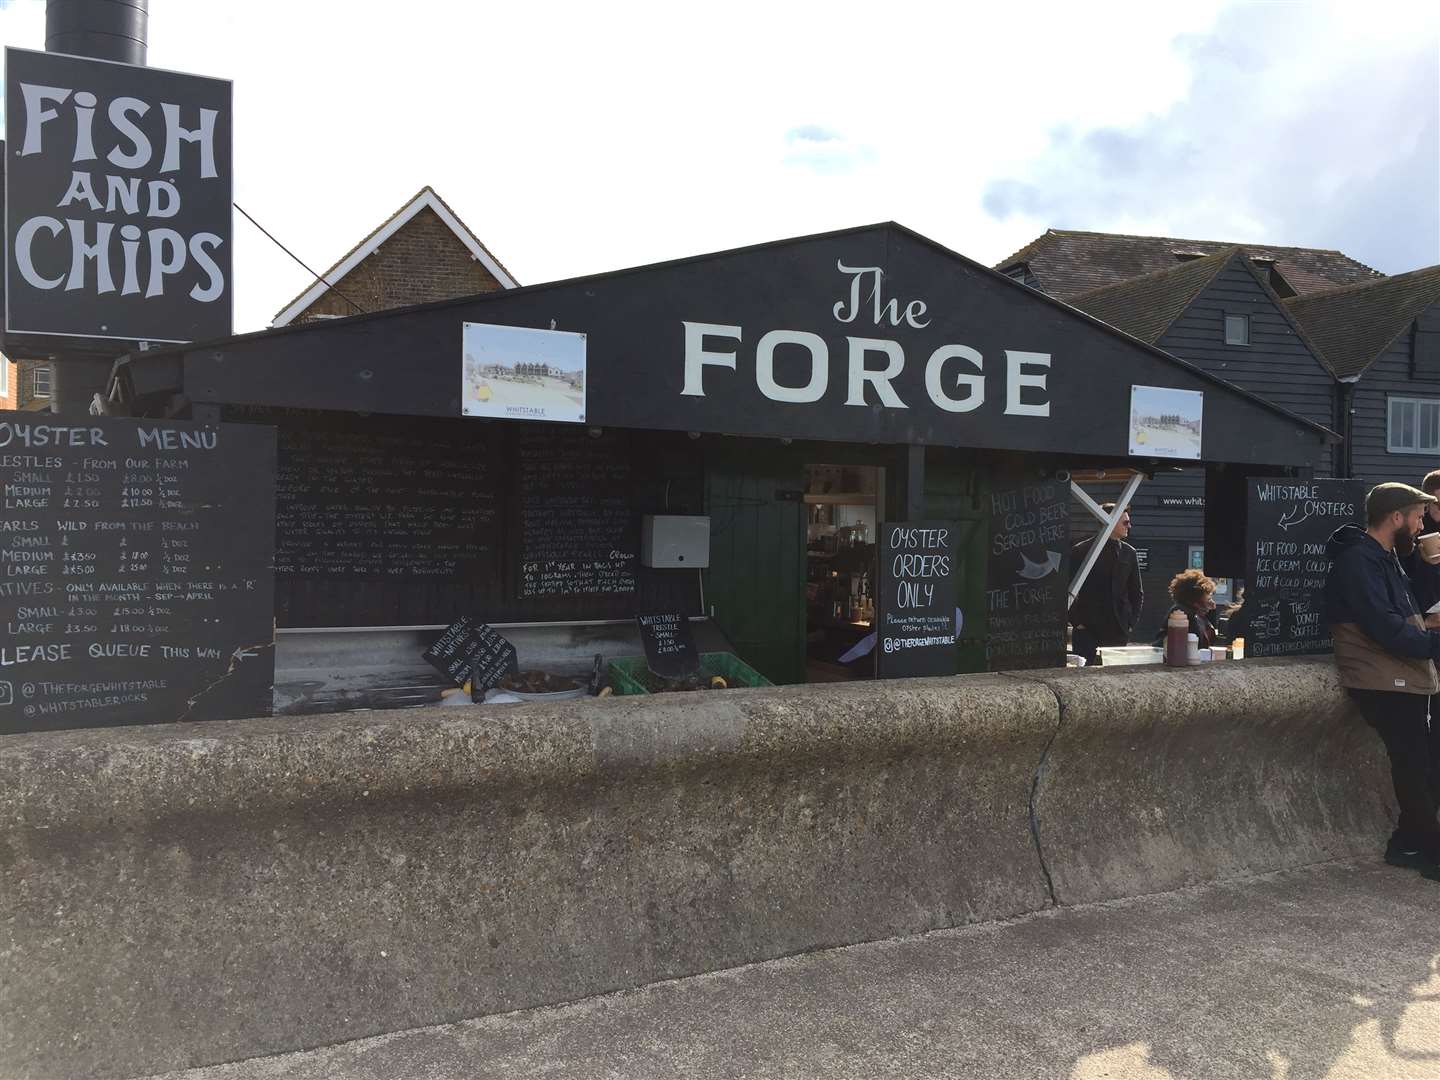 The Forge in Whitstable near Sea Wall